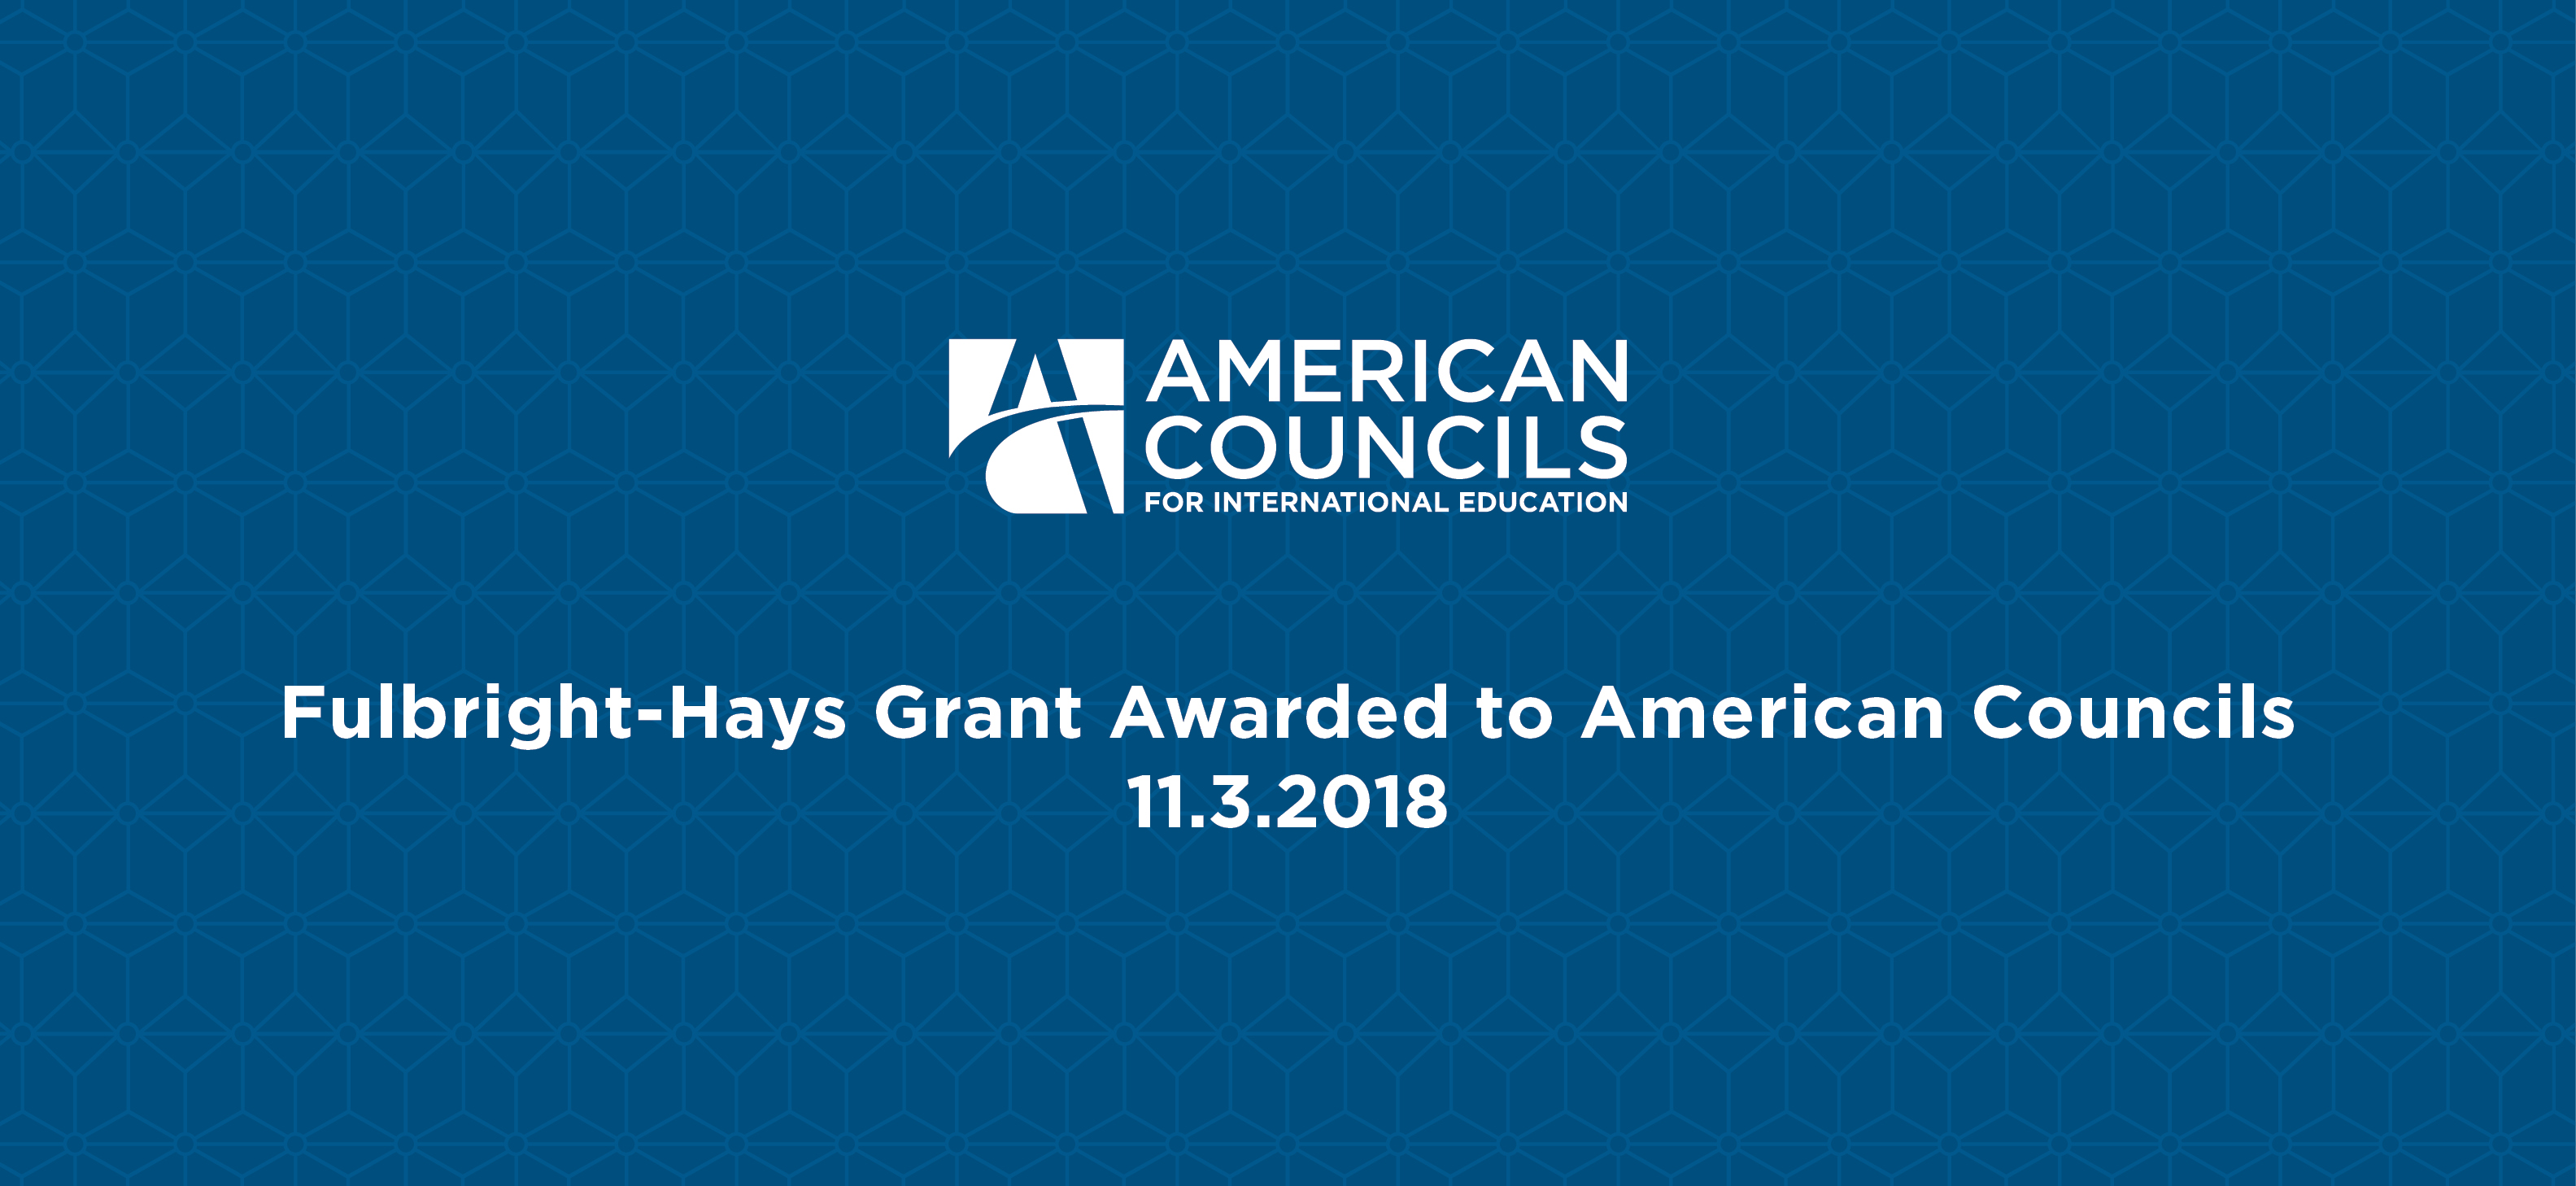 FulbrightHays Grant Awarded to American Councils American Councils